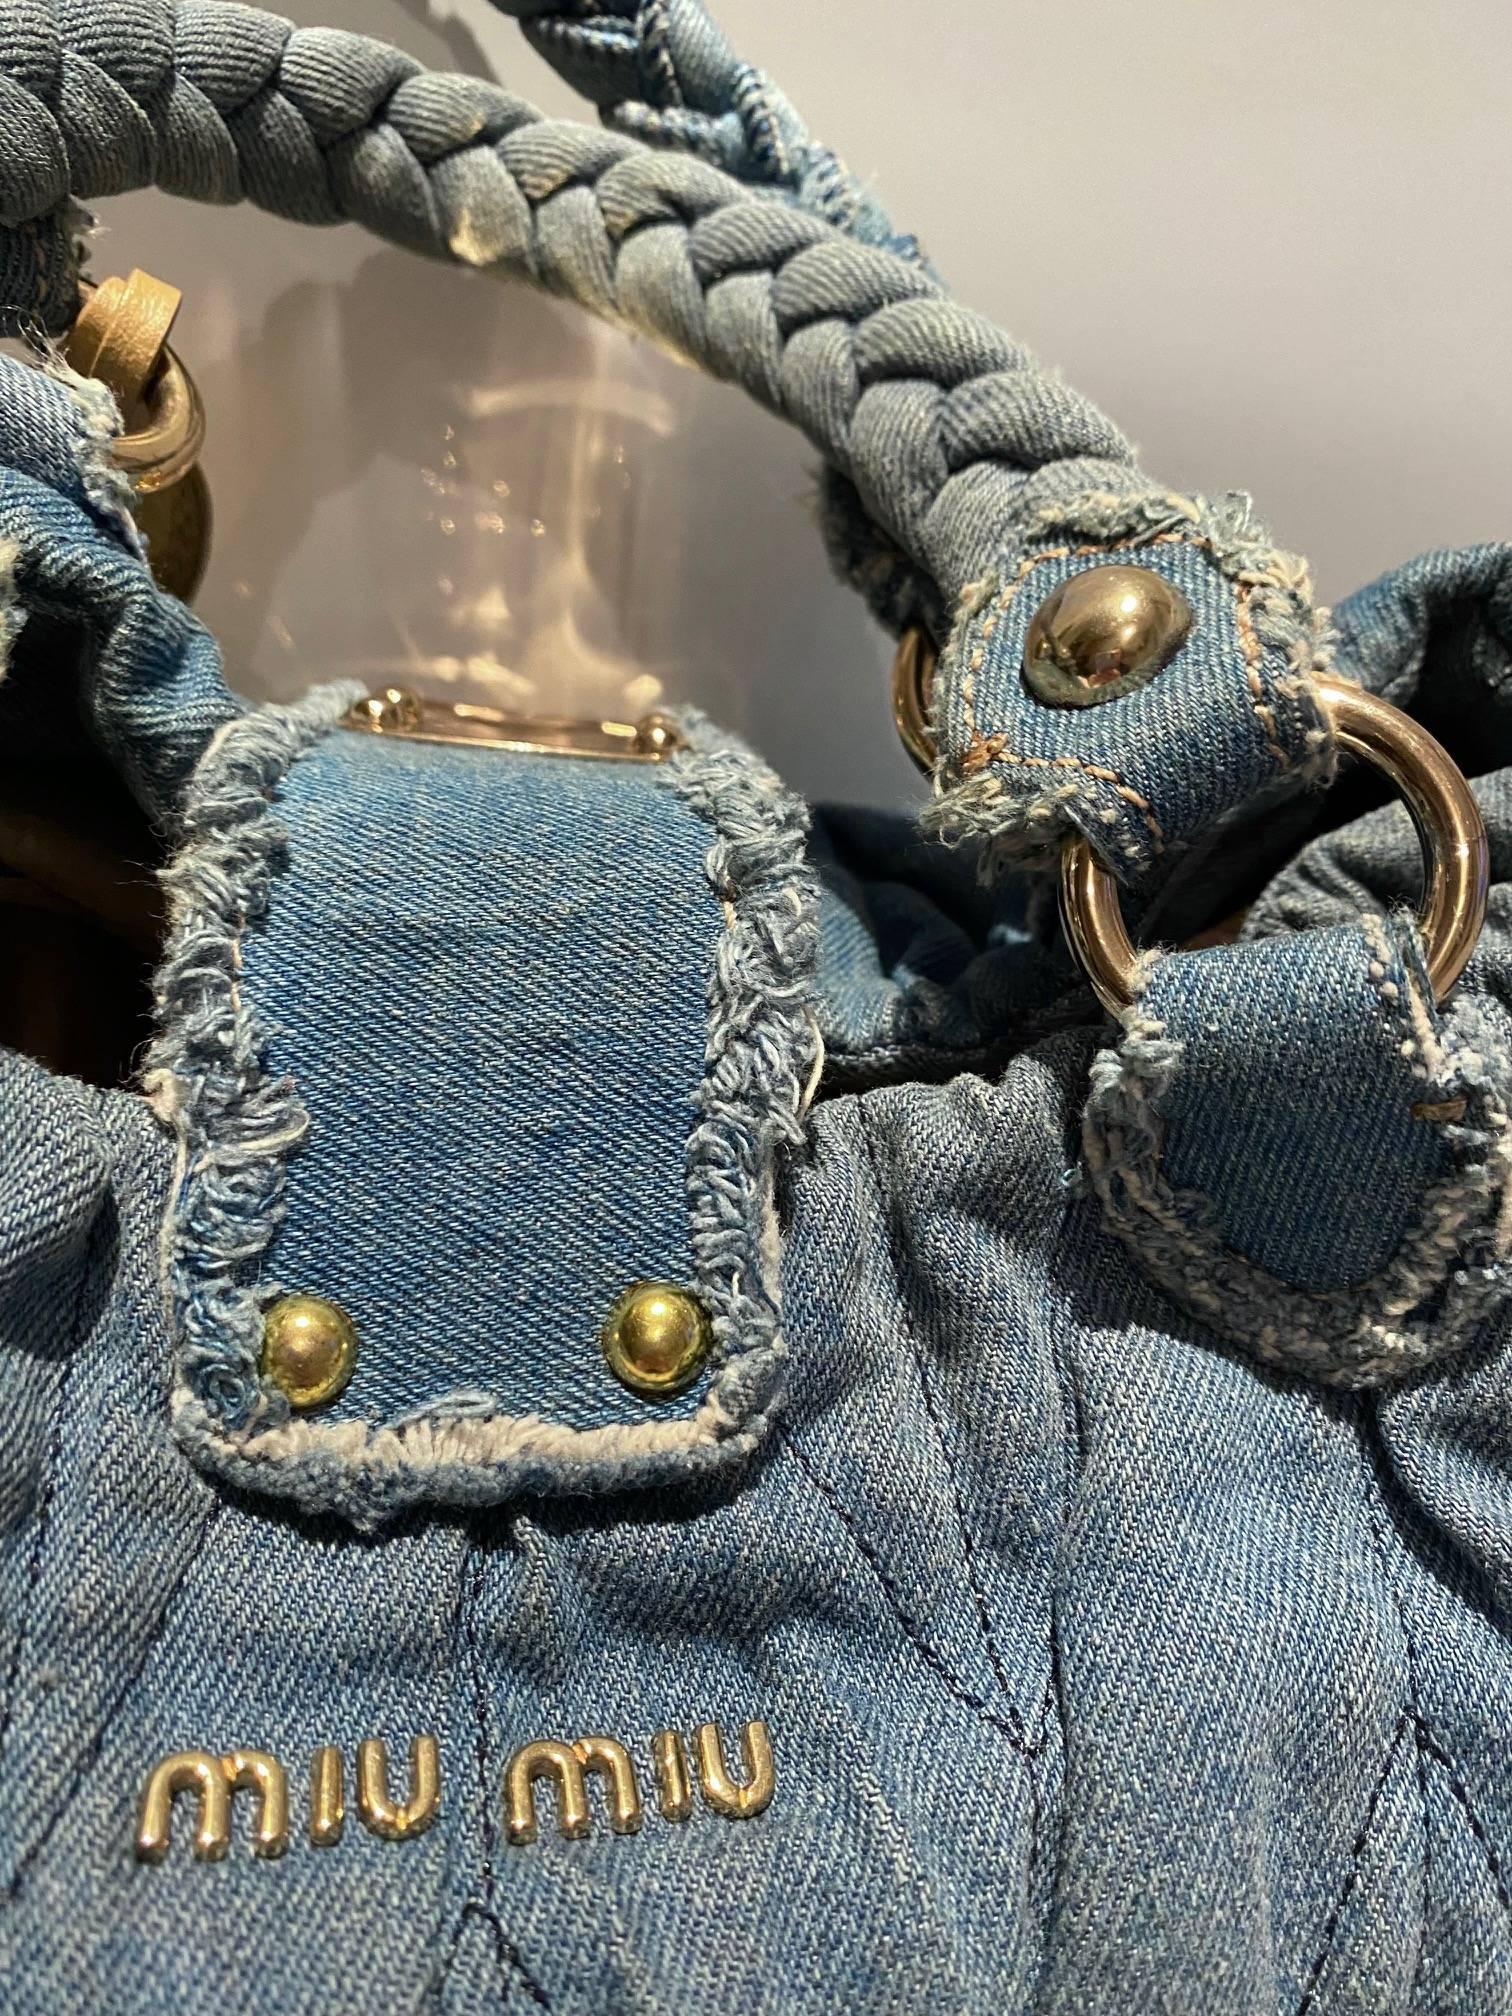 Miu Miu WASHED OUT DENIM MATELASSE BAG

Miu Miu Matelasse bag crafted in blue washed out denim  in signature quilt pattern. Features gold-toned metal hardware and push buckle and braided handles. Interior is lined in purple satin and has a zippered